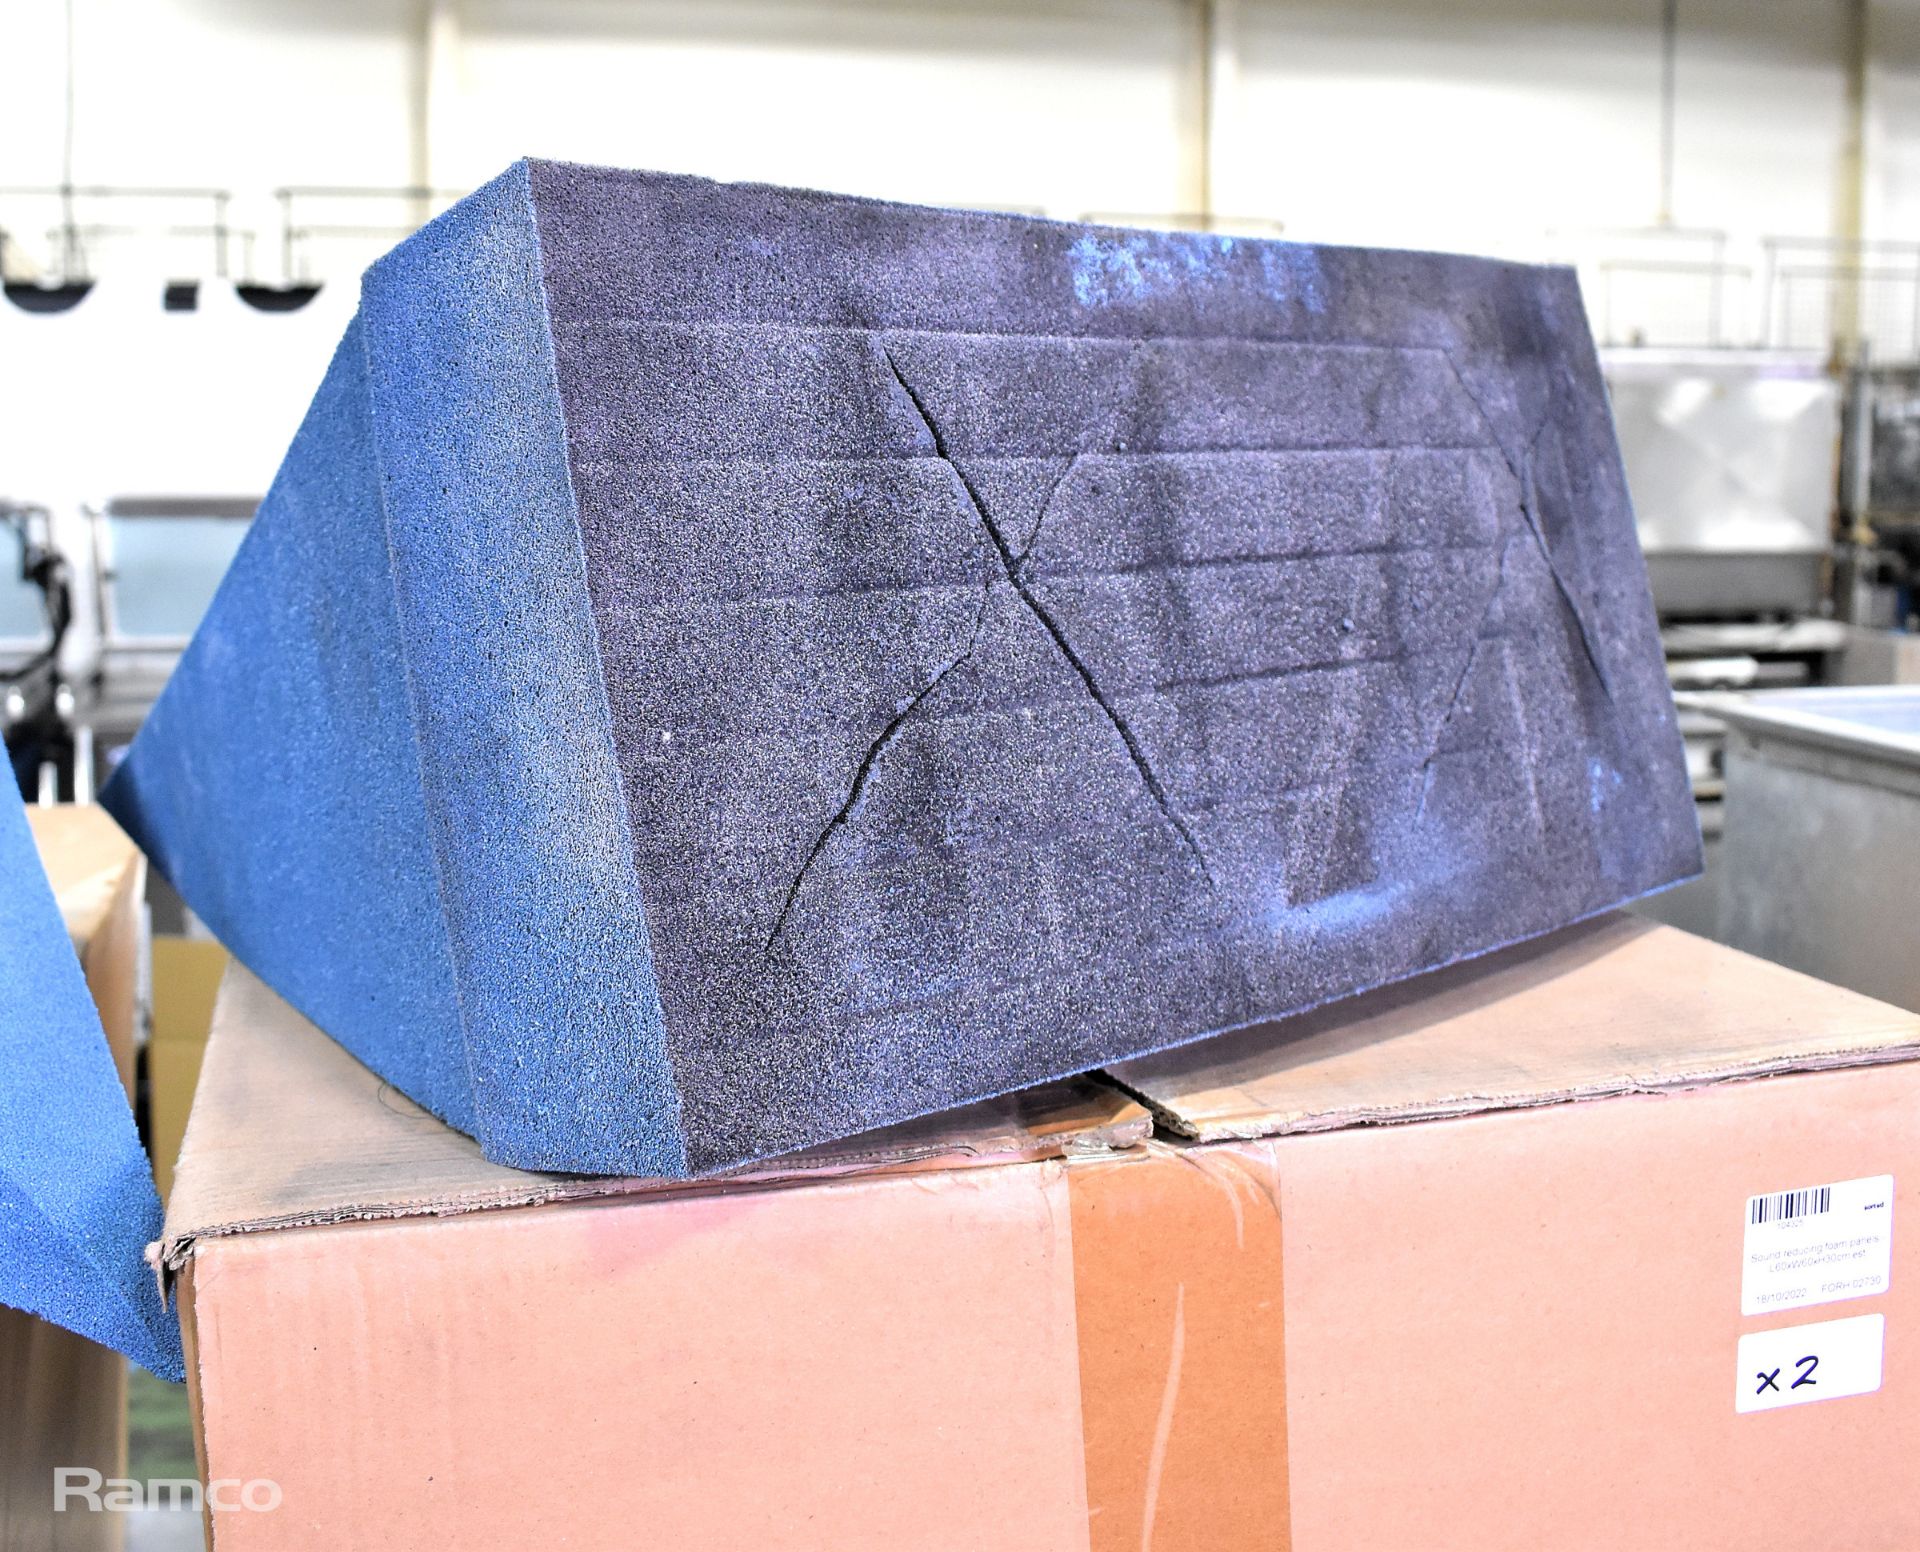 7x Anechoic Sound reducing foam panels - triangular prism design - dimensions in the description - Image 3 of 4